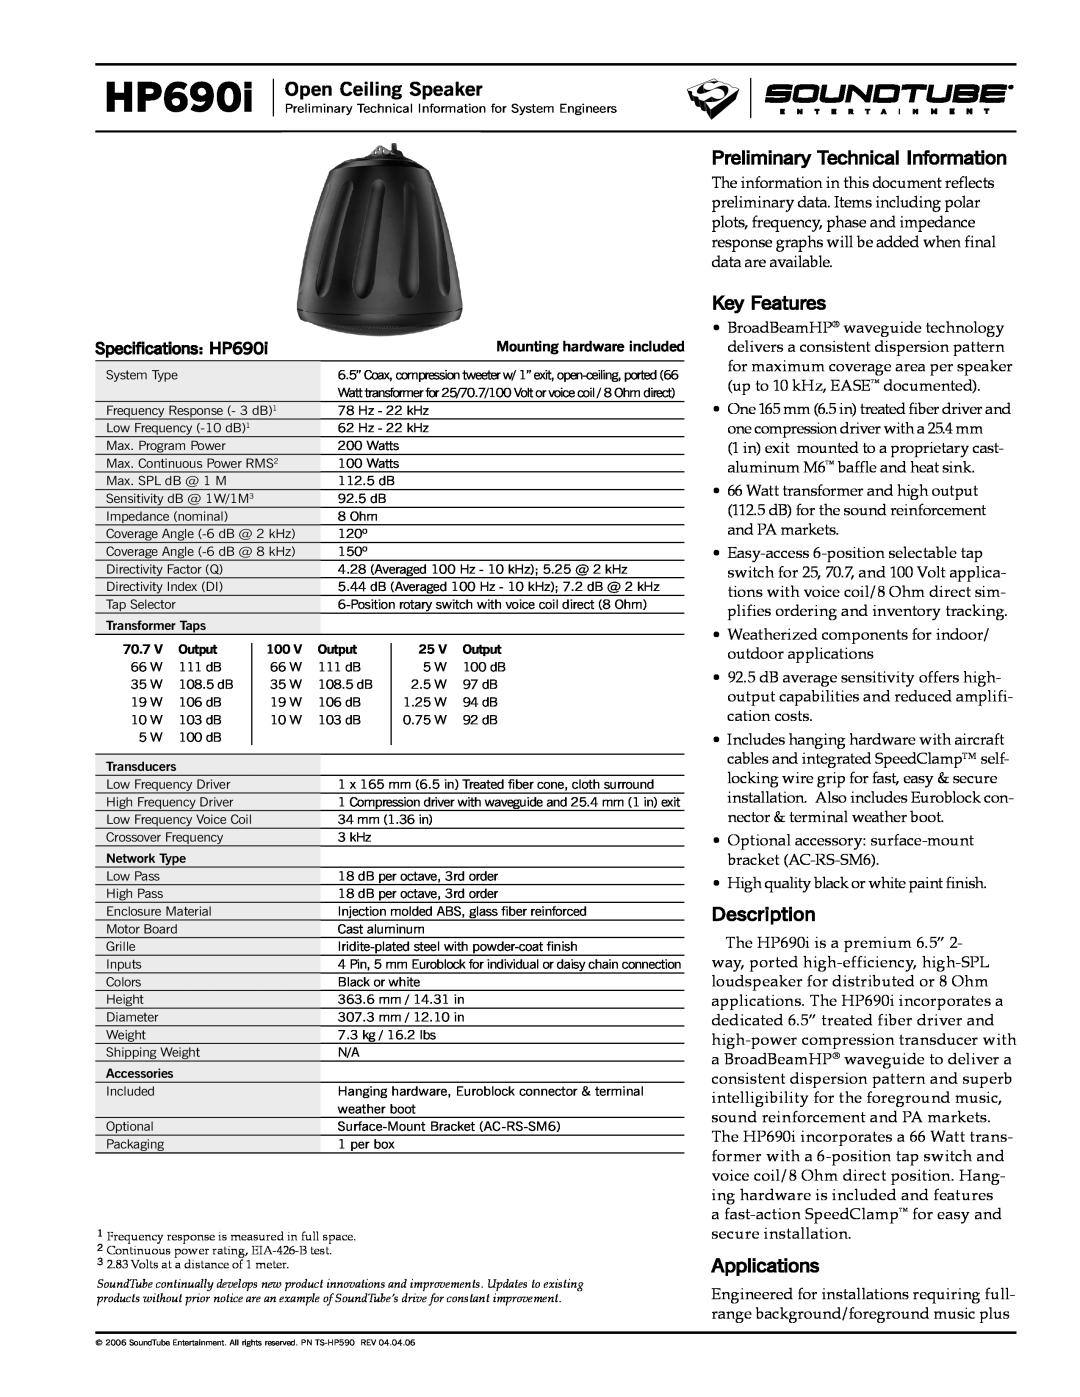 Phase Technology HP690i specifications Open Ceiling Speaker, Preliminary TechnicalInformation, Key Features, Description 